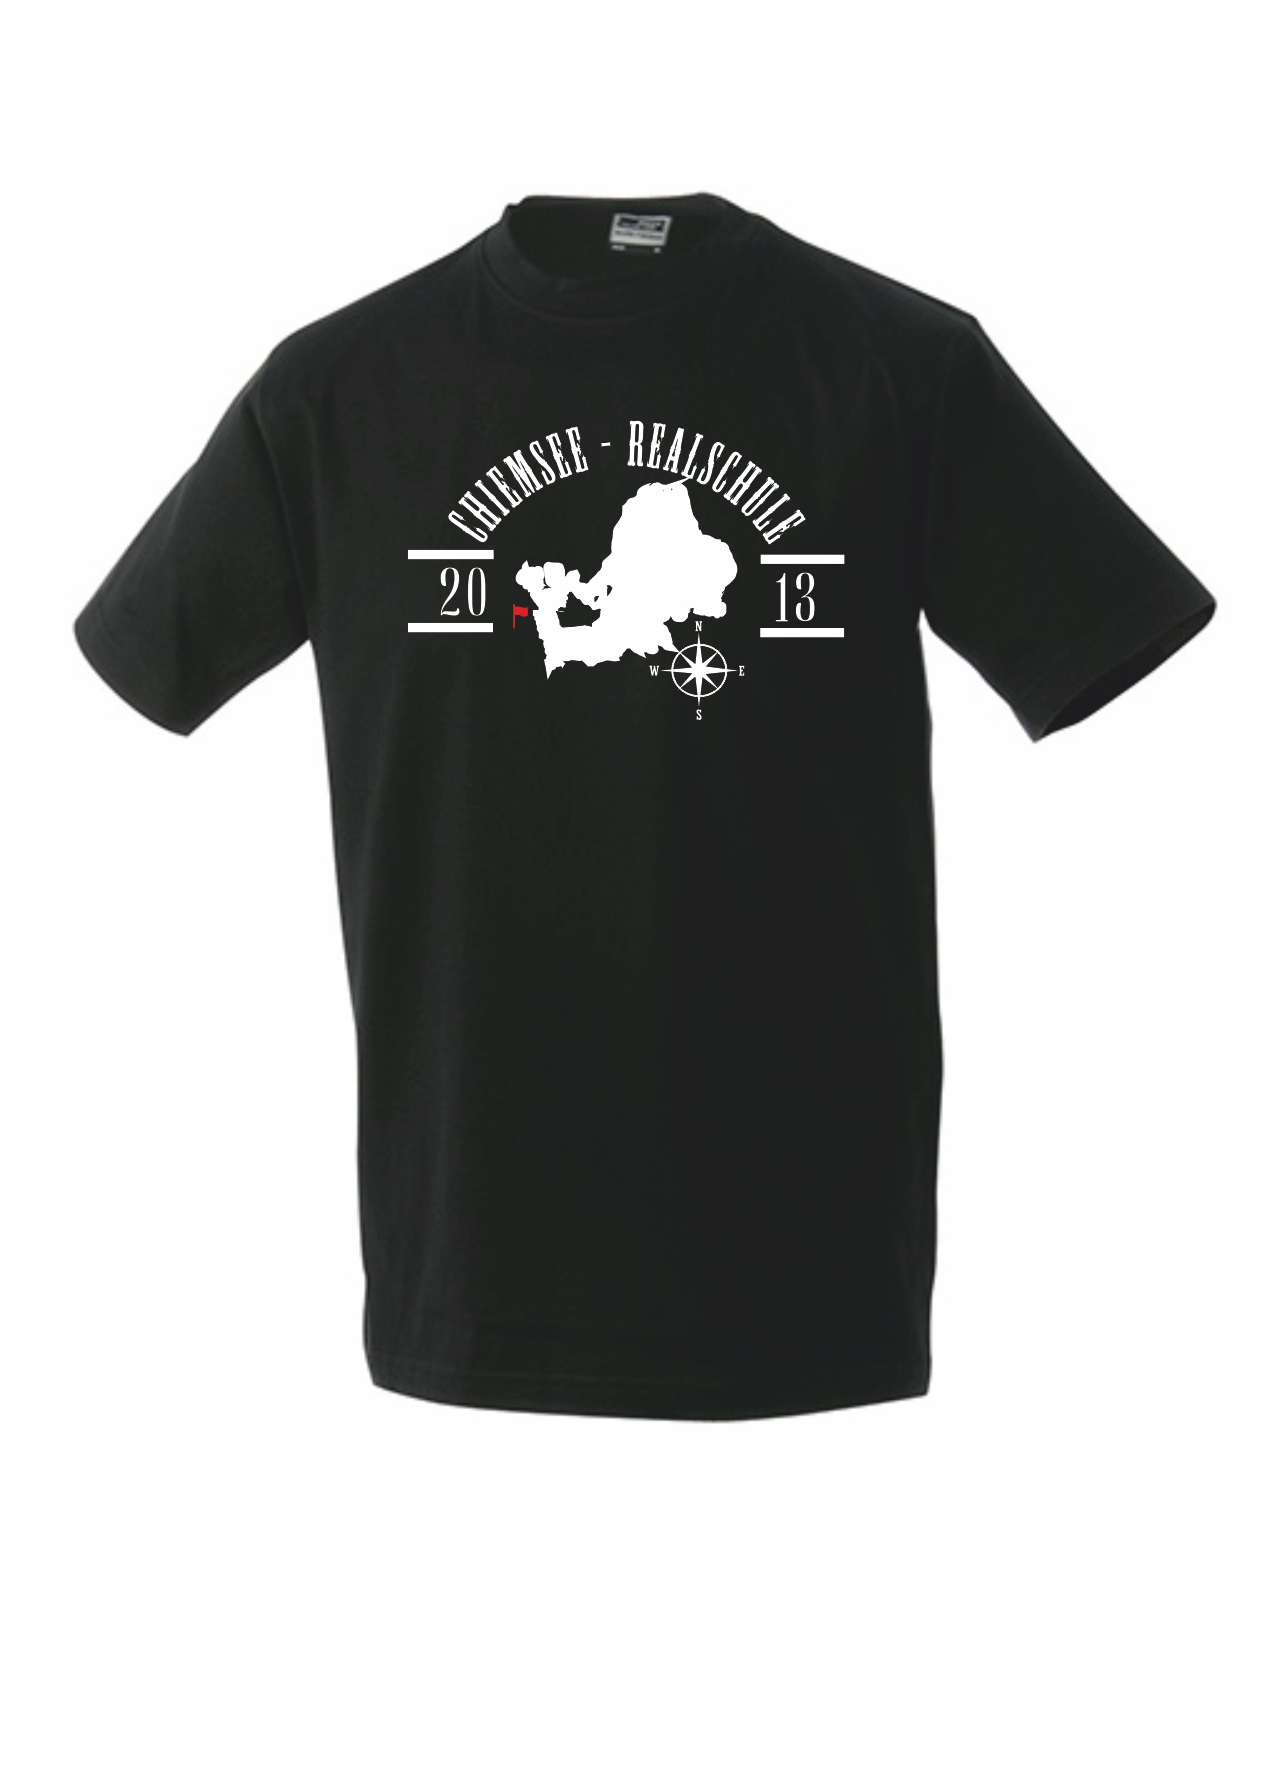 T-Shirt Chiemsee-Realschule